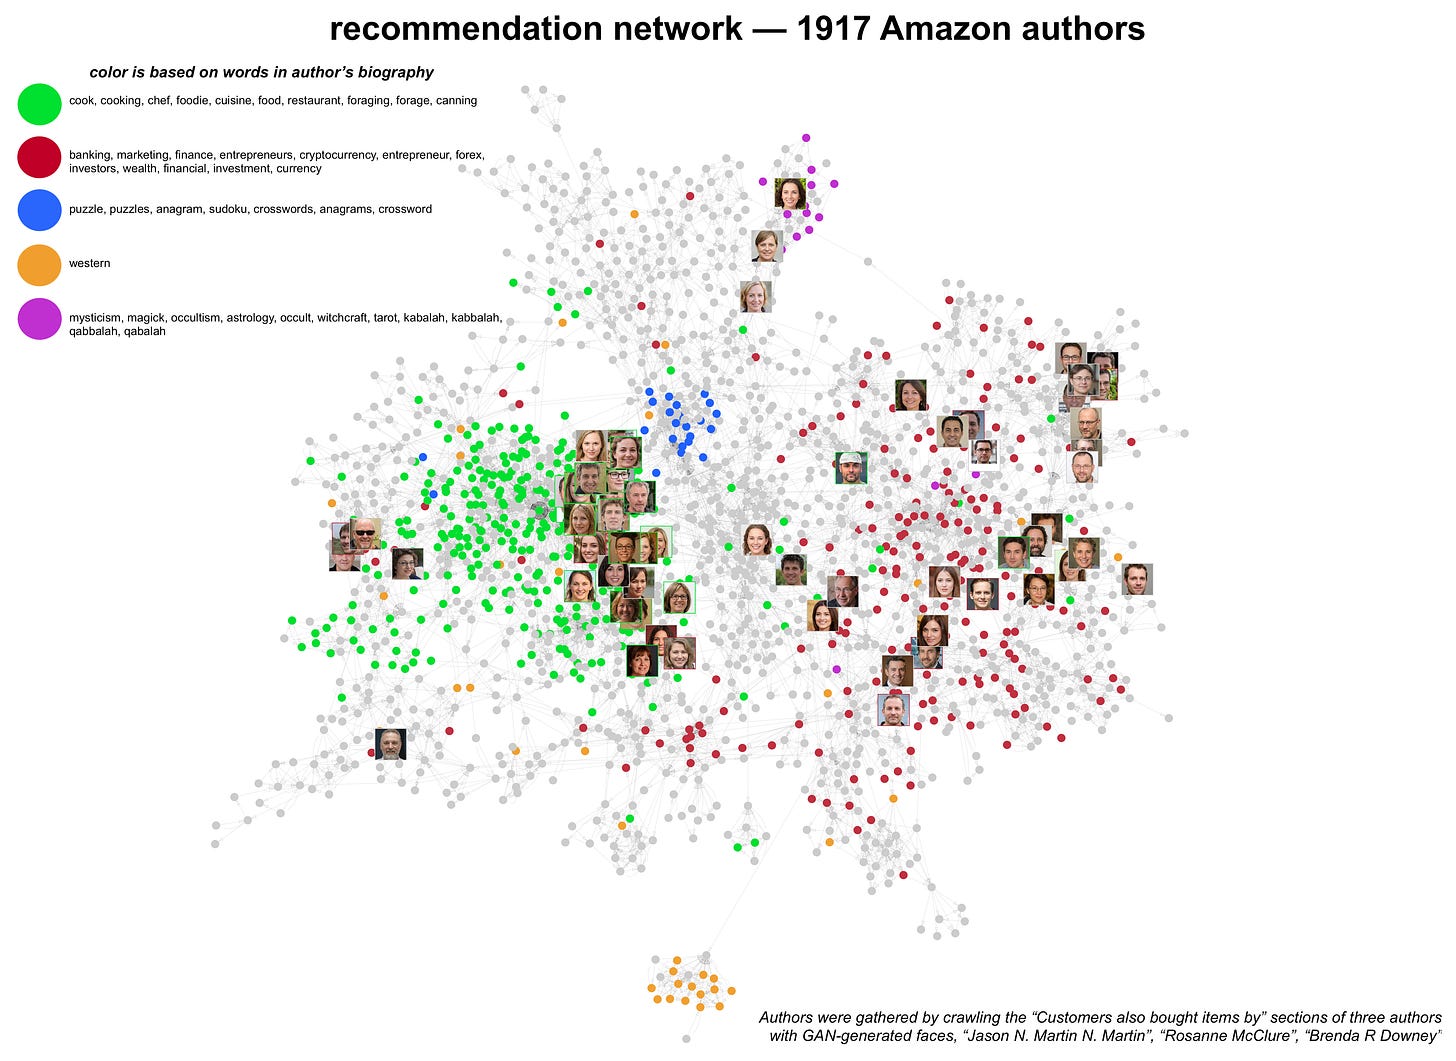 network diagram showing the recommendation relationships between 1917 authors, with the portraits of the 71 authors with GAN-generated faces included